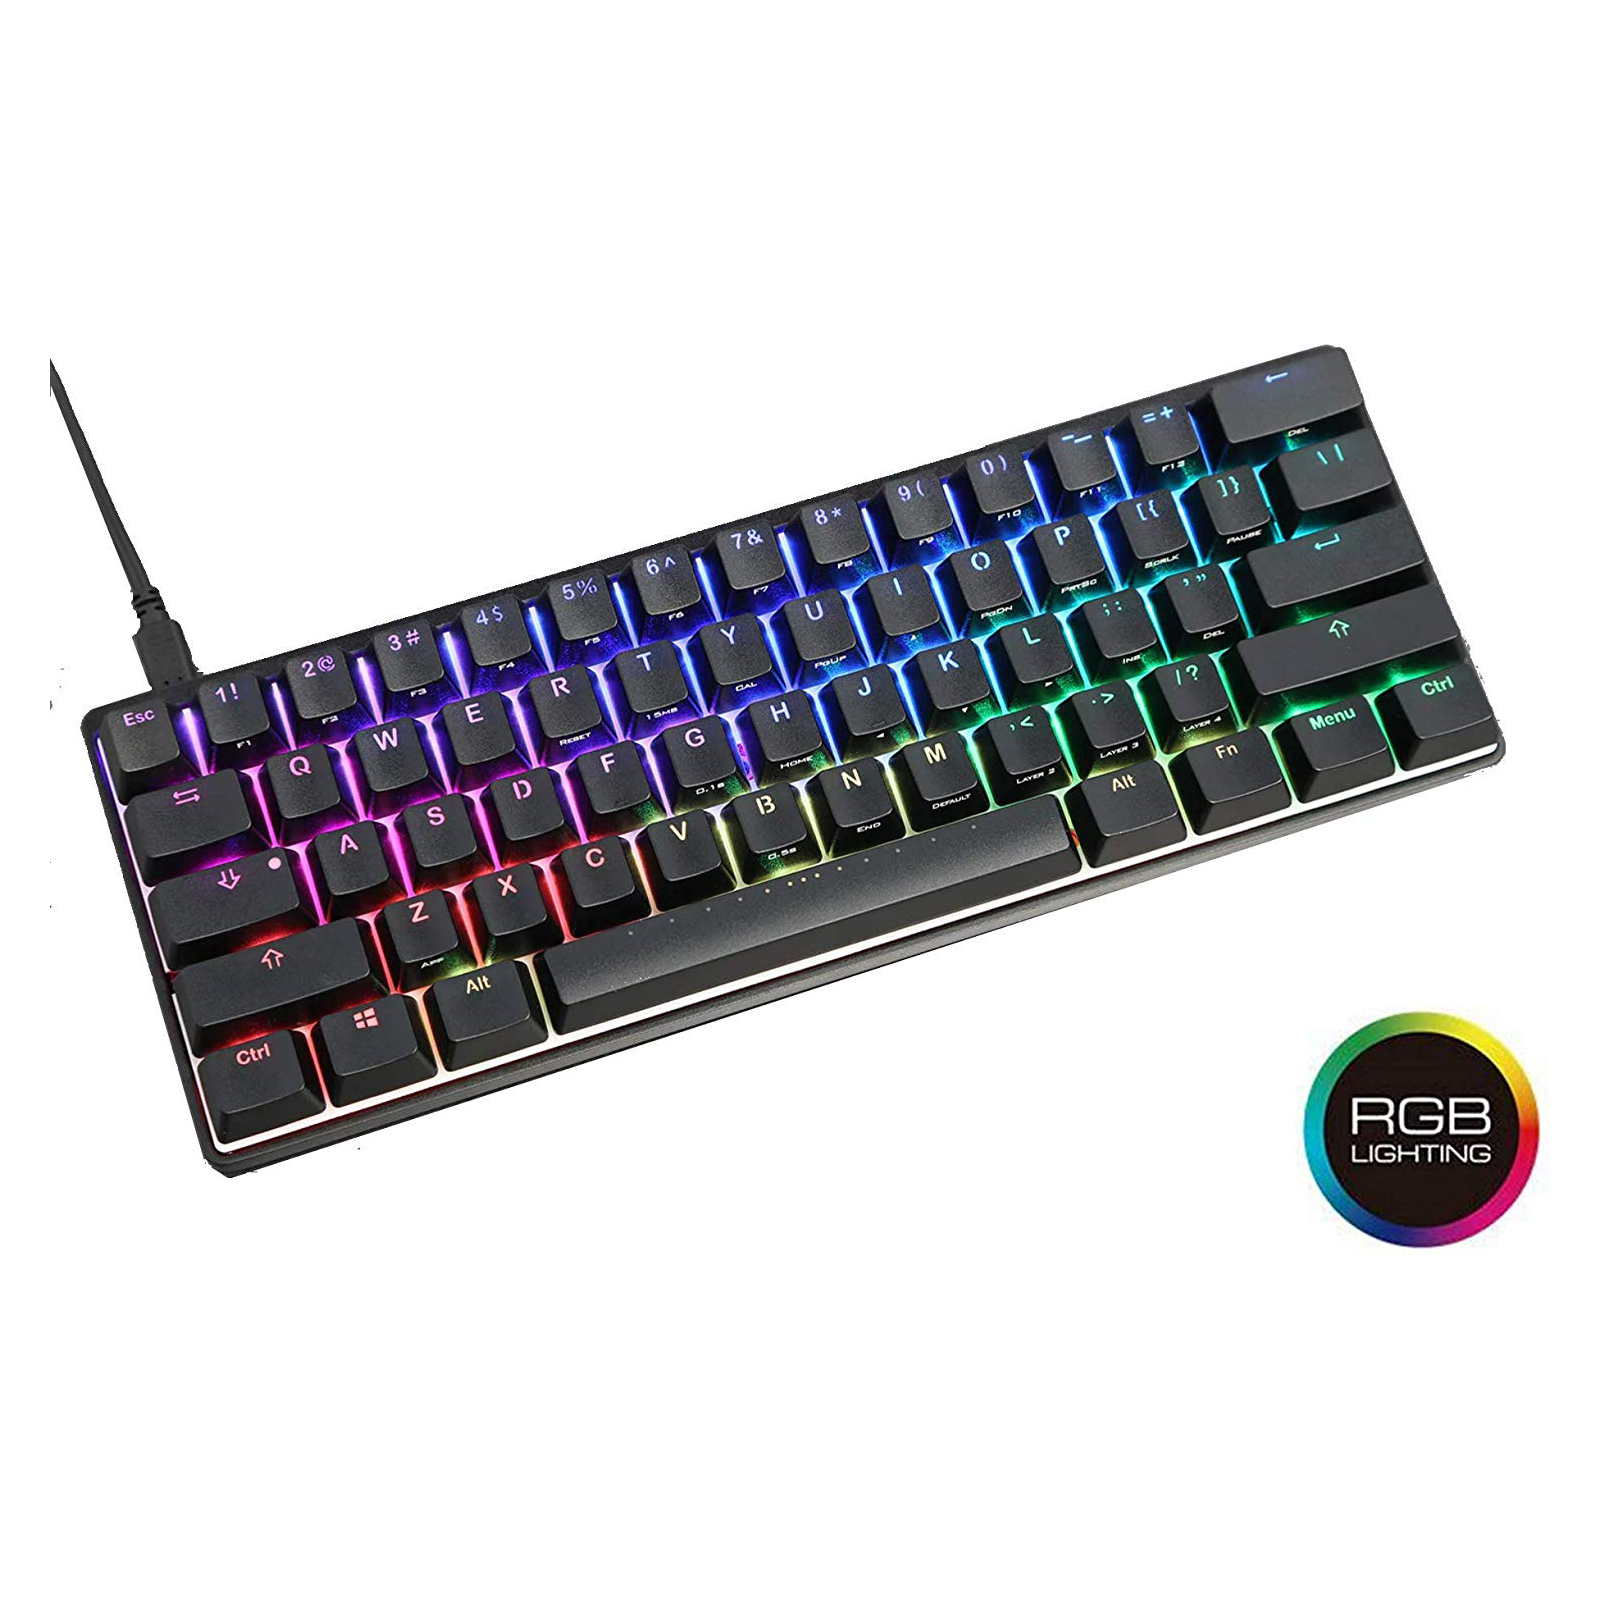 Best USB Keyboard for Windows and Mac for 2019 | Vortex Pok3r RGB with Cherry MX switches